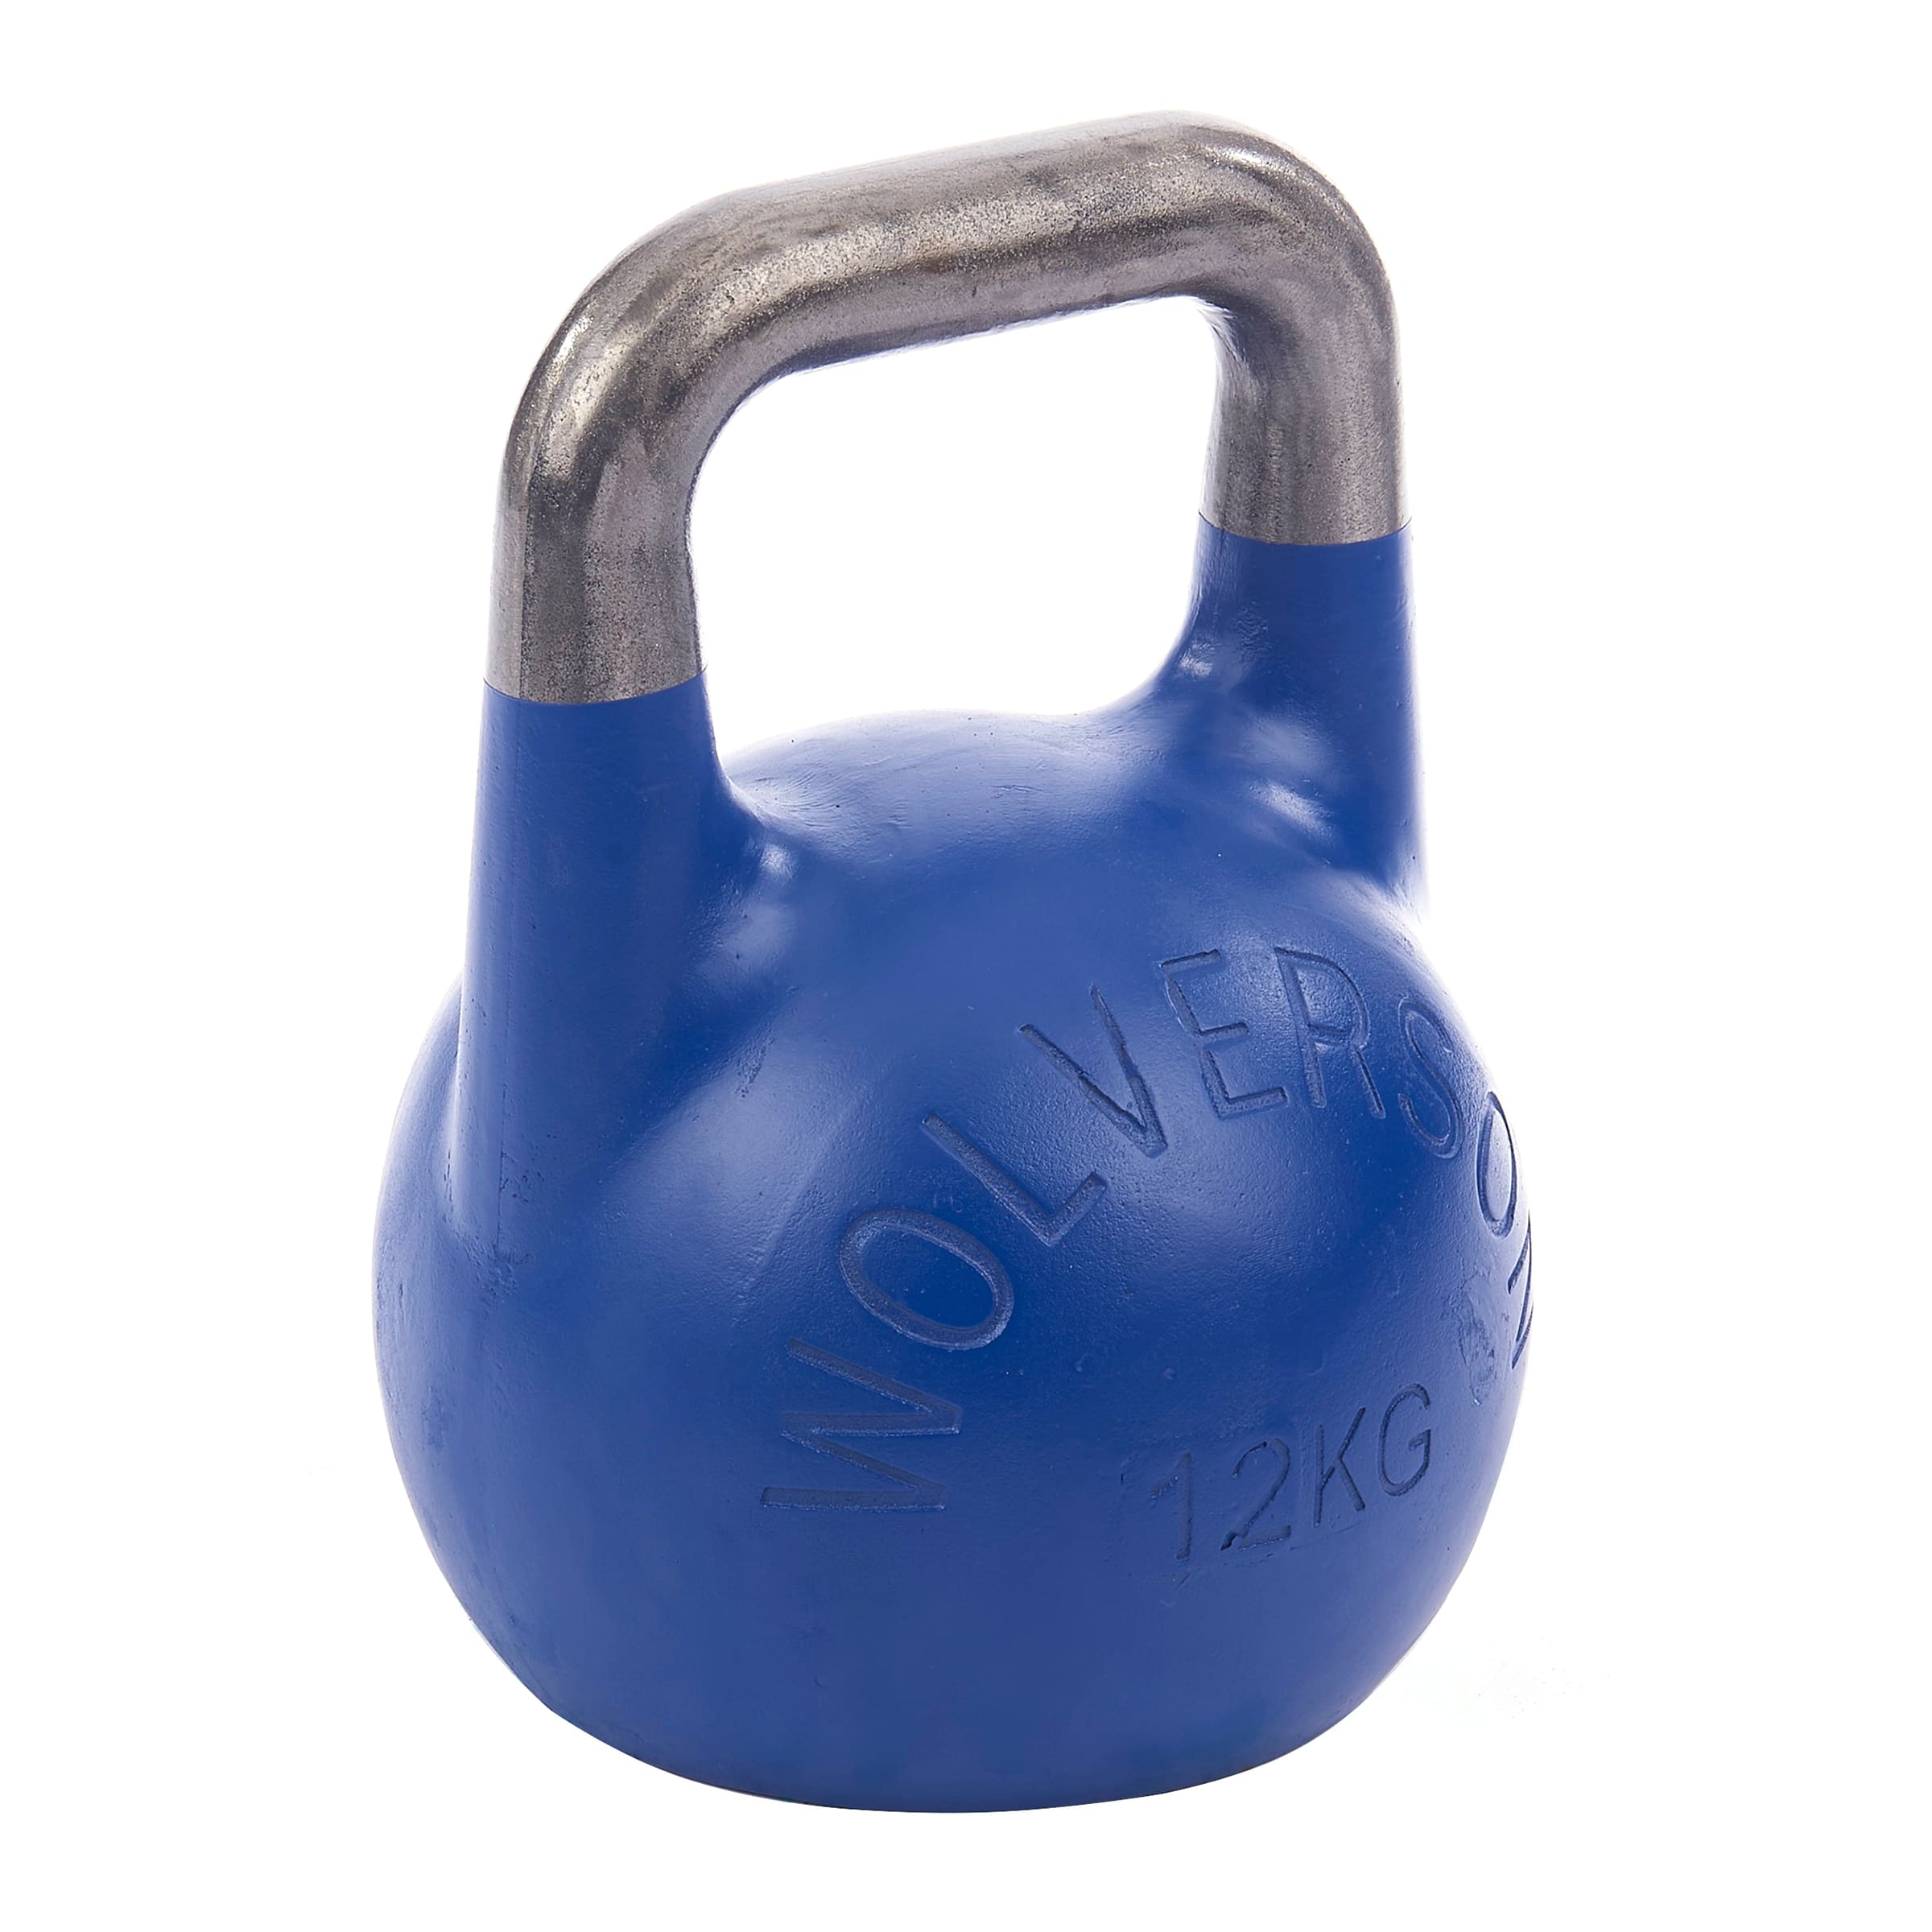 Wolverson Competition Kettlebells - Wolverson Fitness